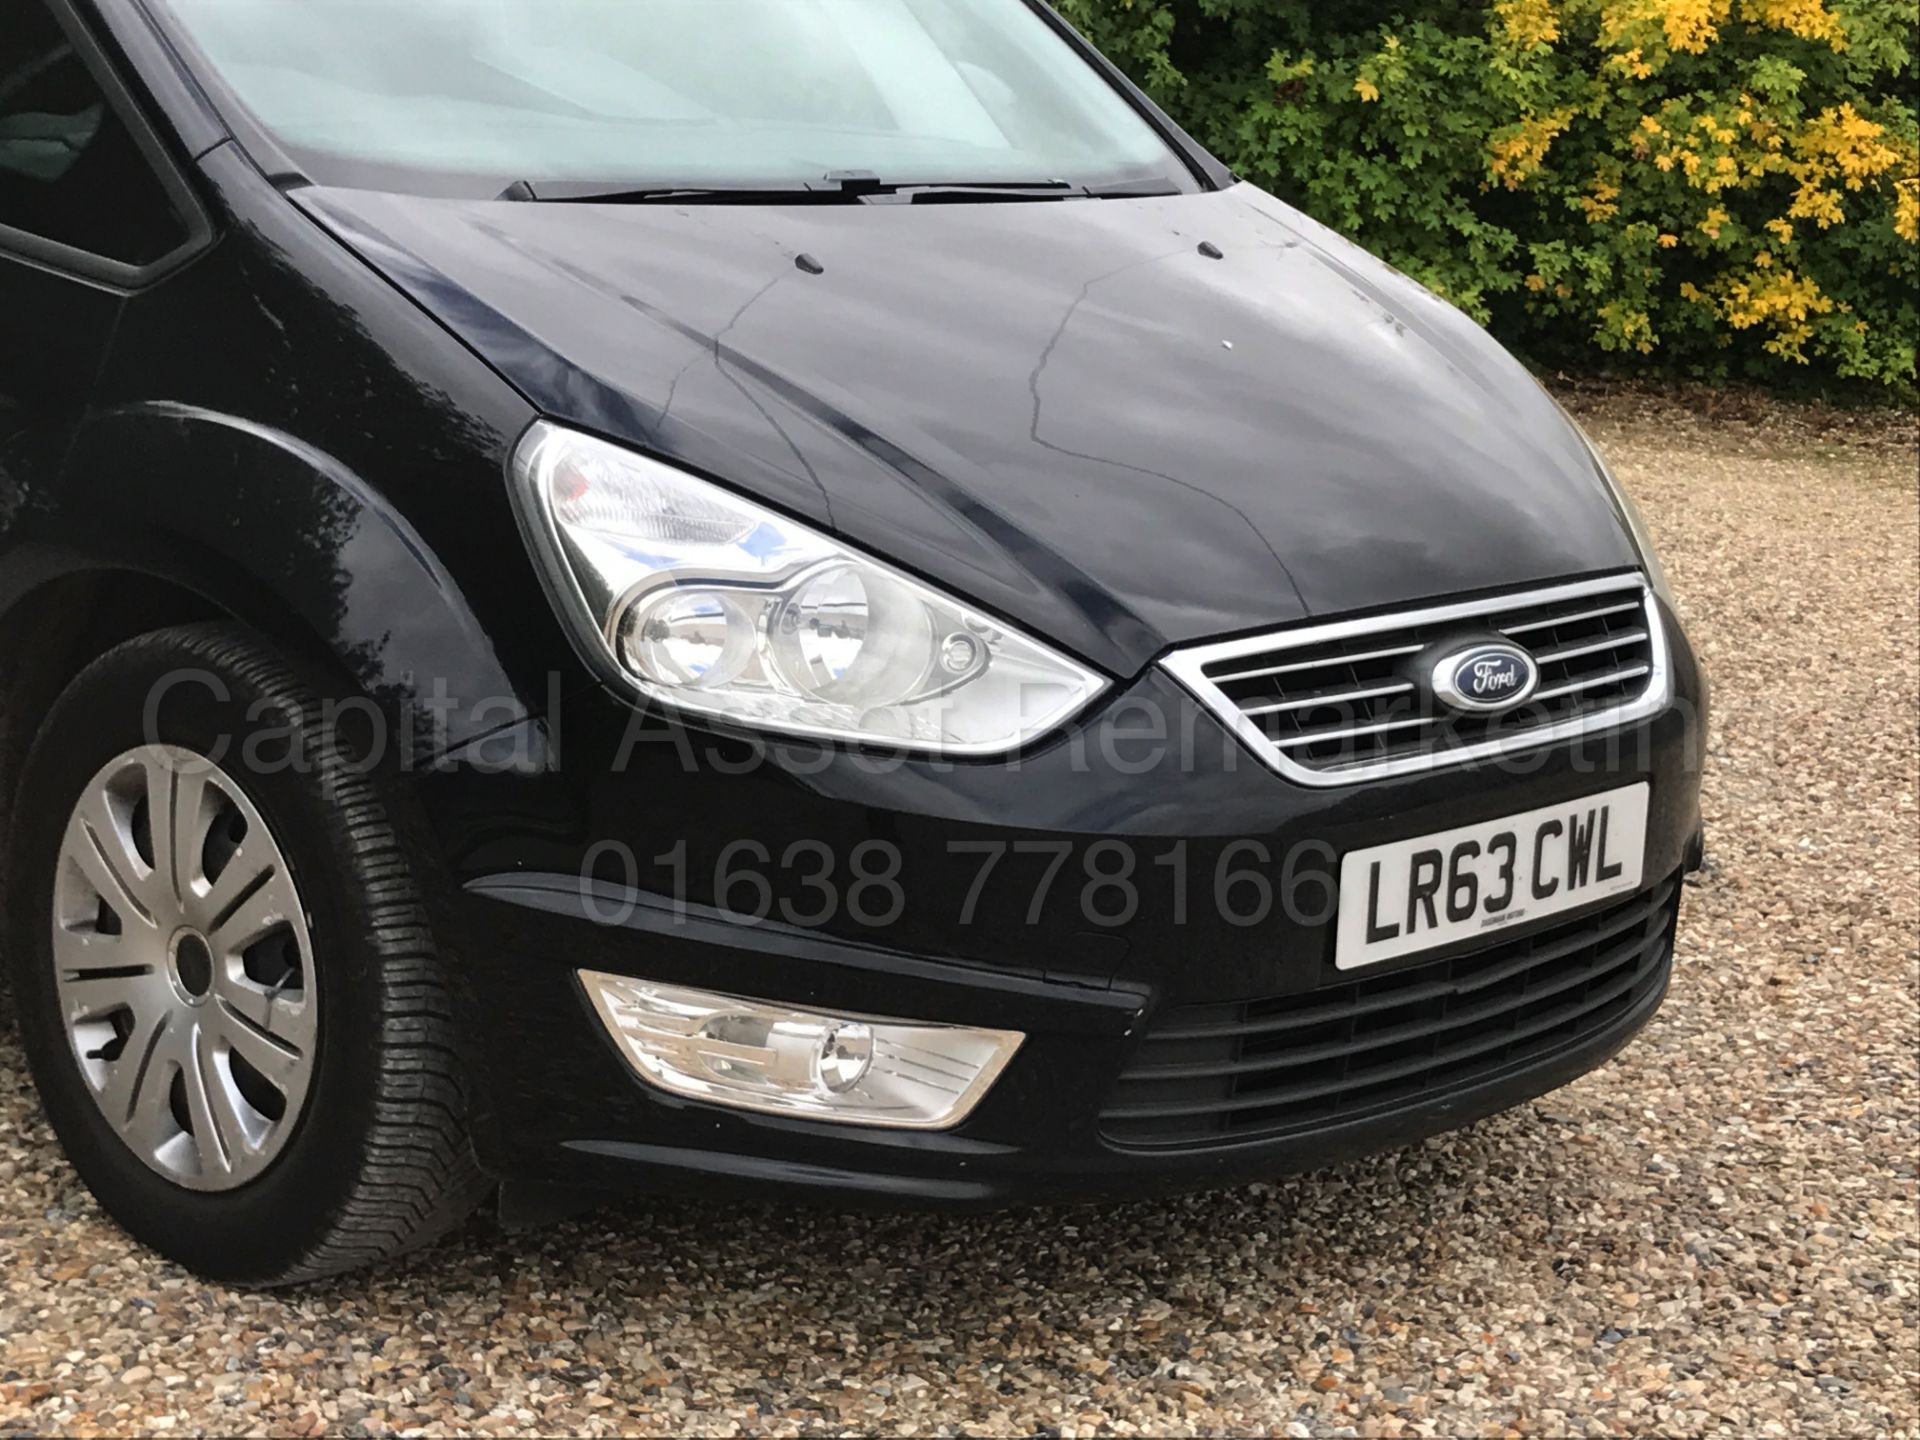 FORD GALAXY 'ZETEC' 7 SEATER MPV (2014 MODEL) '2.0 TDCI - 140 BHP - POWER SHIFT' (1 OWNER FROM NEW) - Image 11 of 27